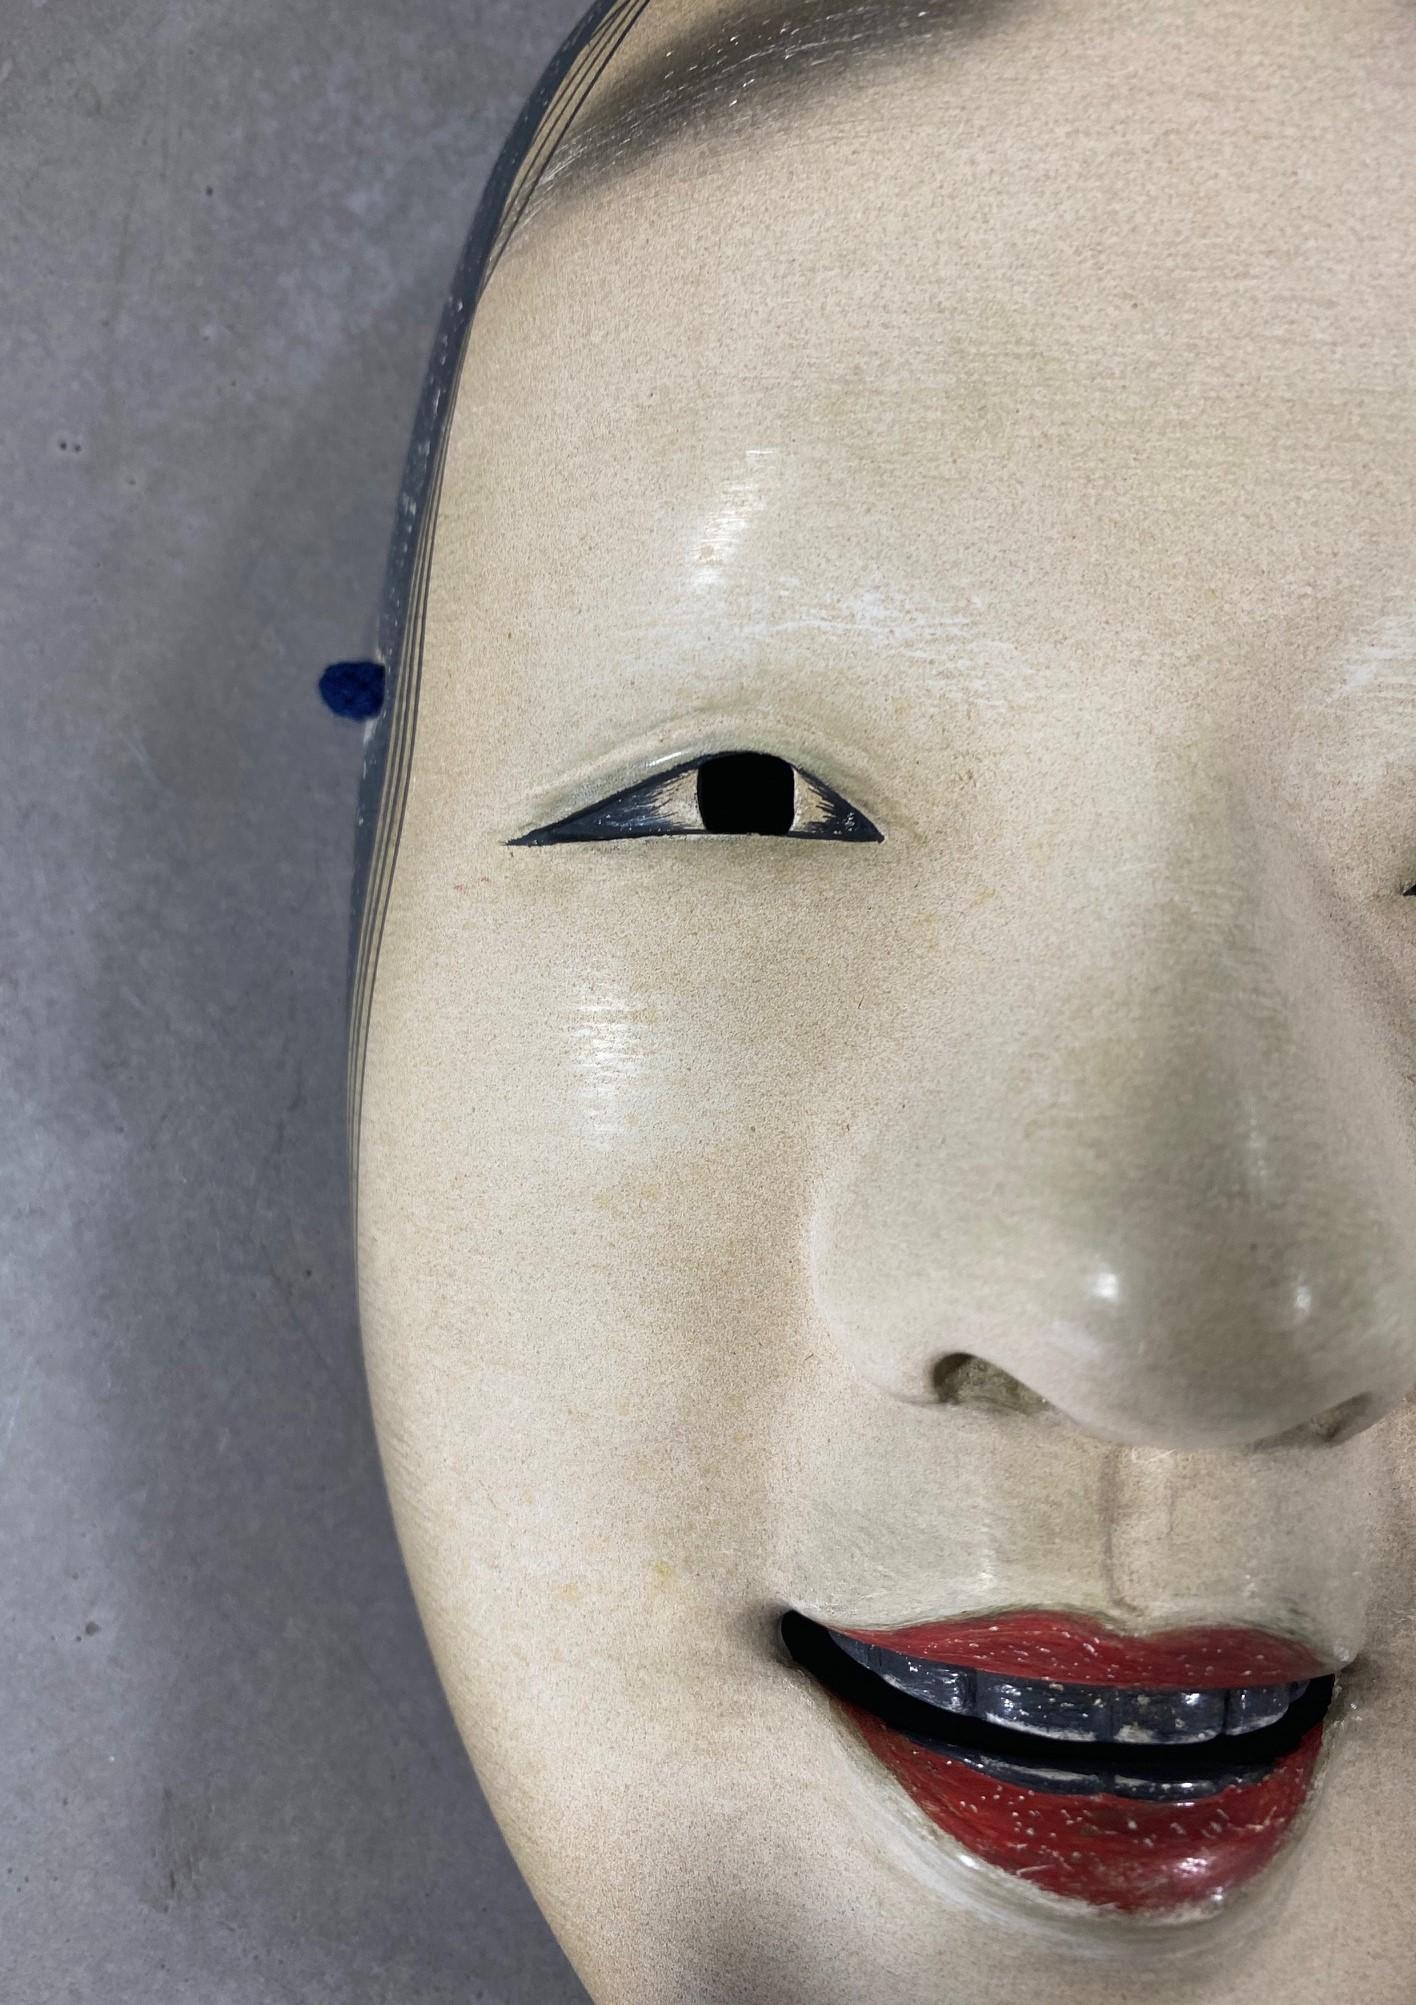 noh mask meaning